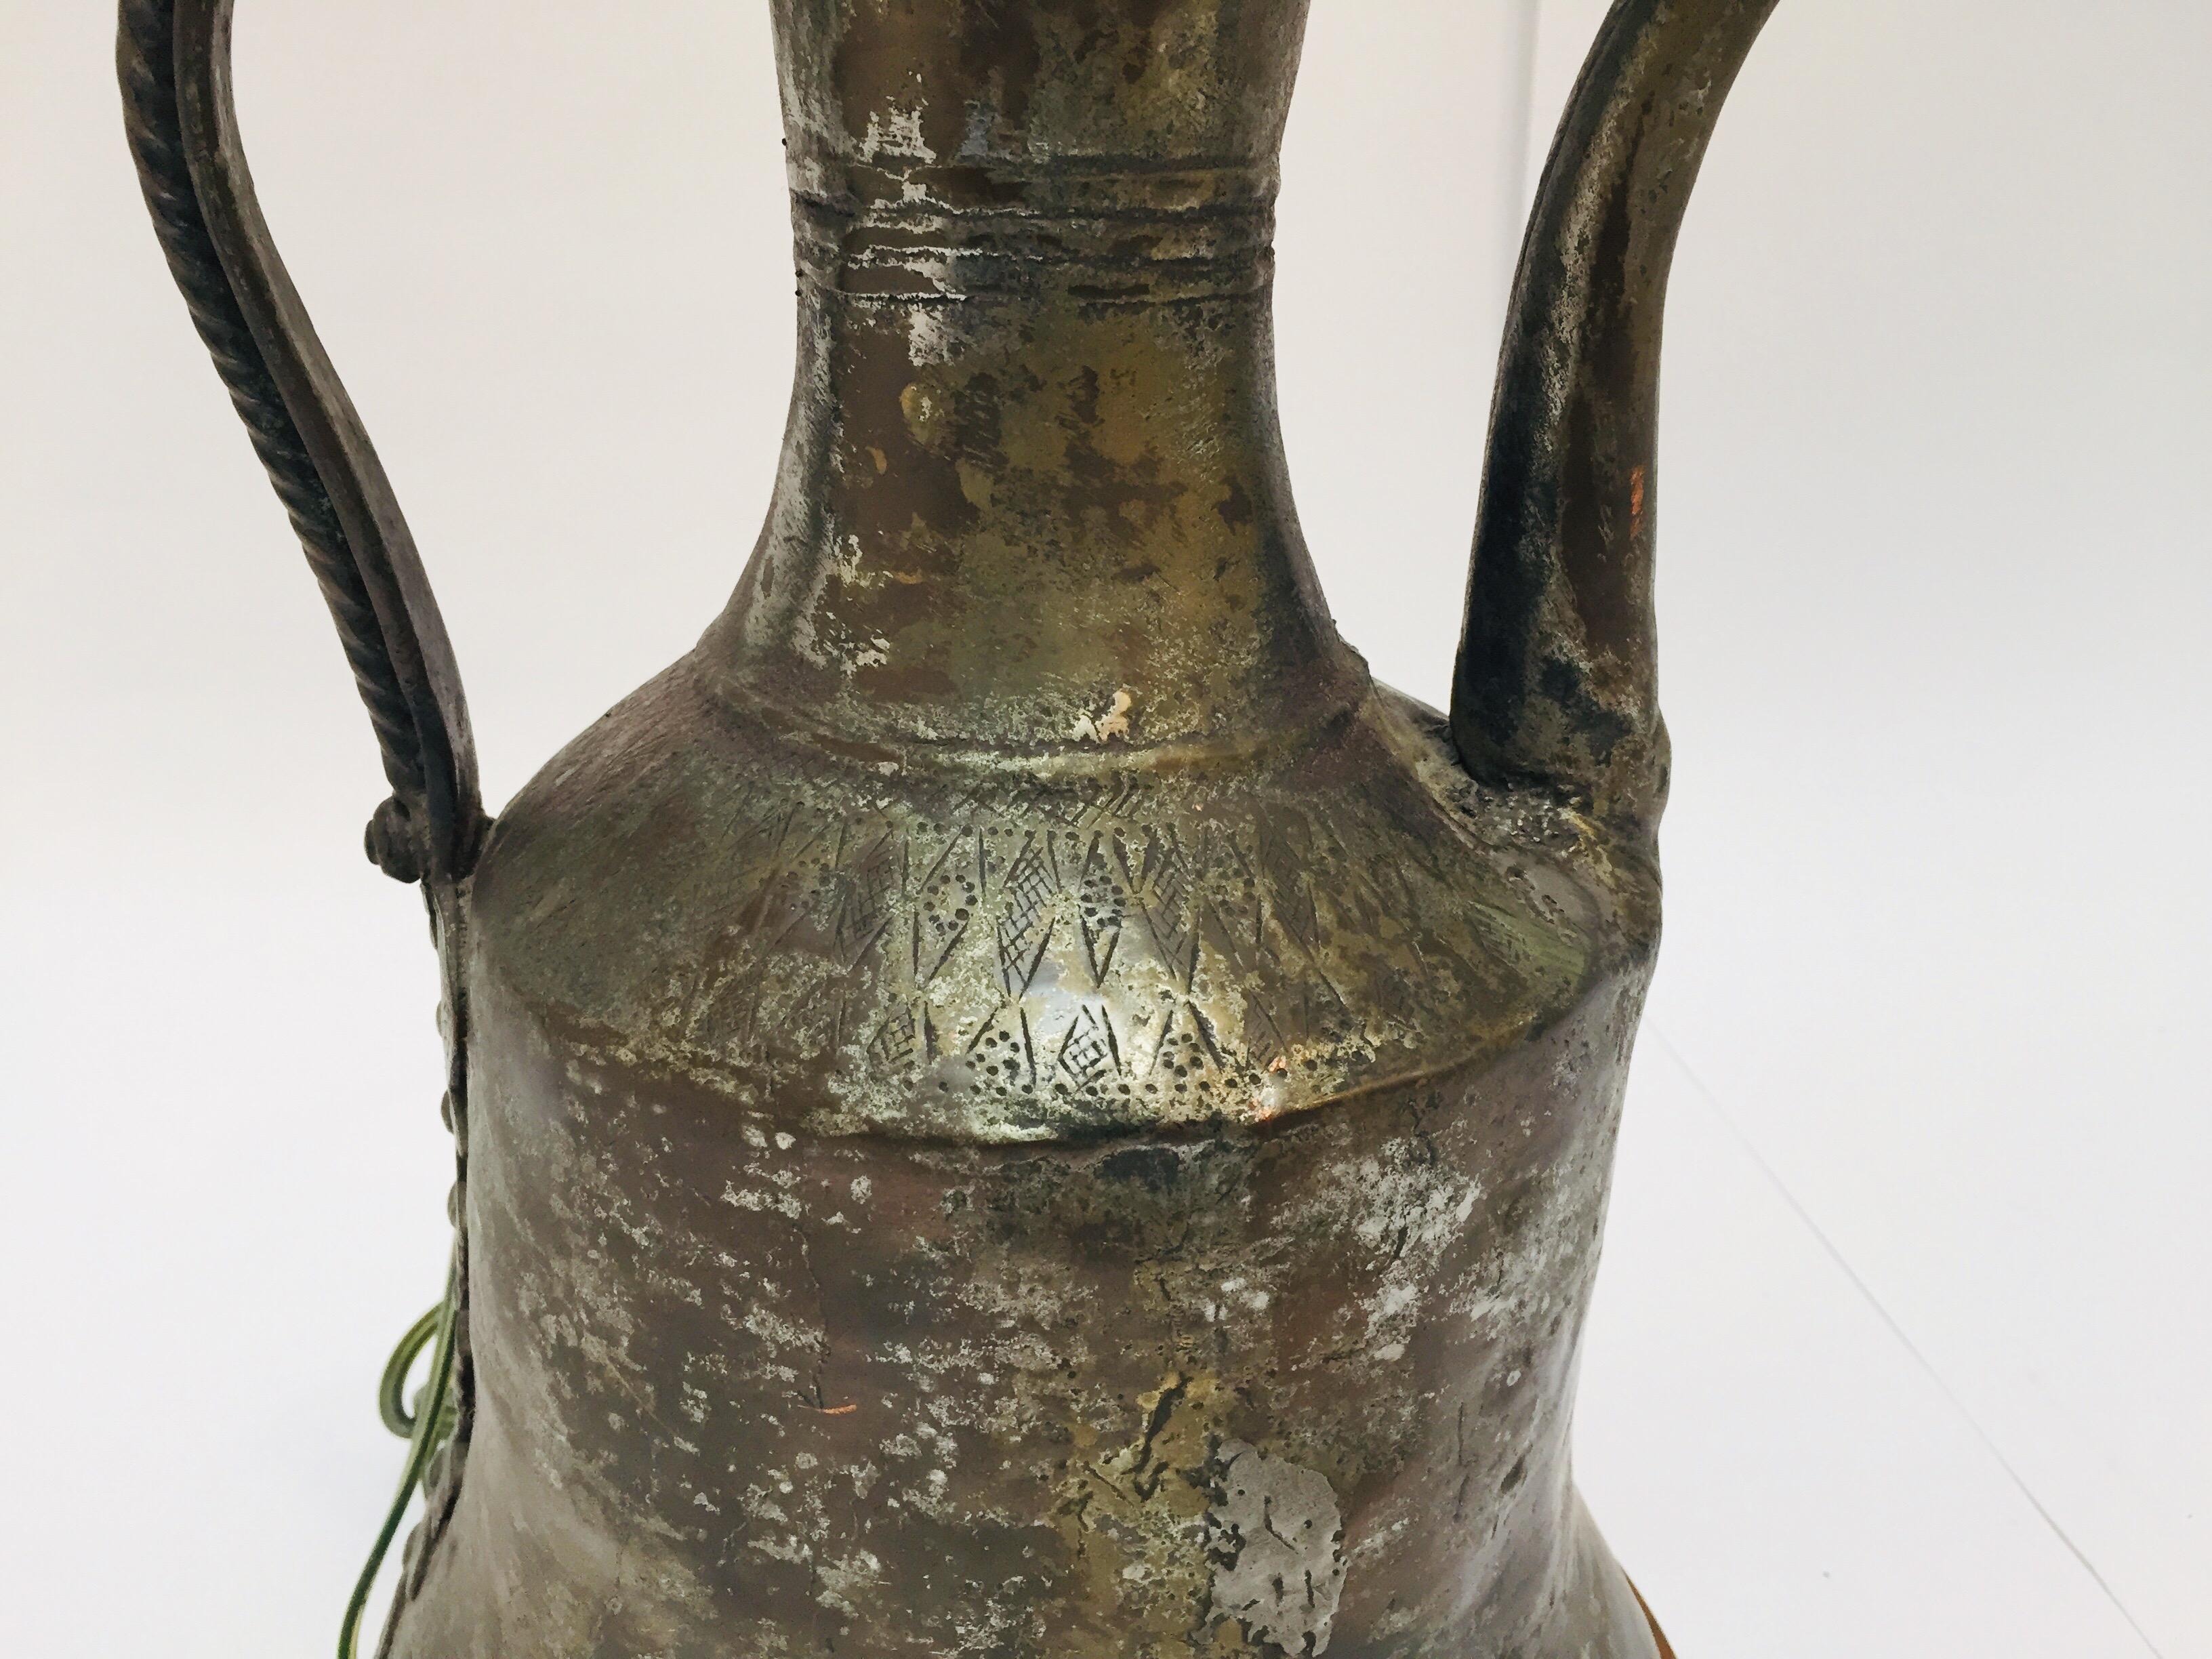 19th century Middle Eastern traditional Arabian tinned copper Dallah coffee pot made into a table lamp.
Coffee pot hand-hammered tinned copper with riveted brass finish.
Total height: 20